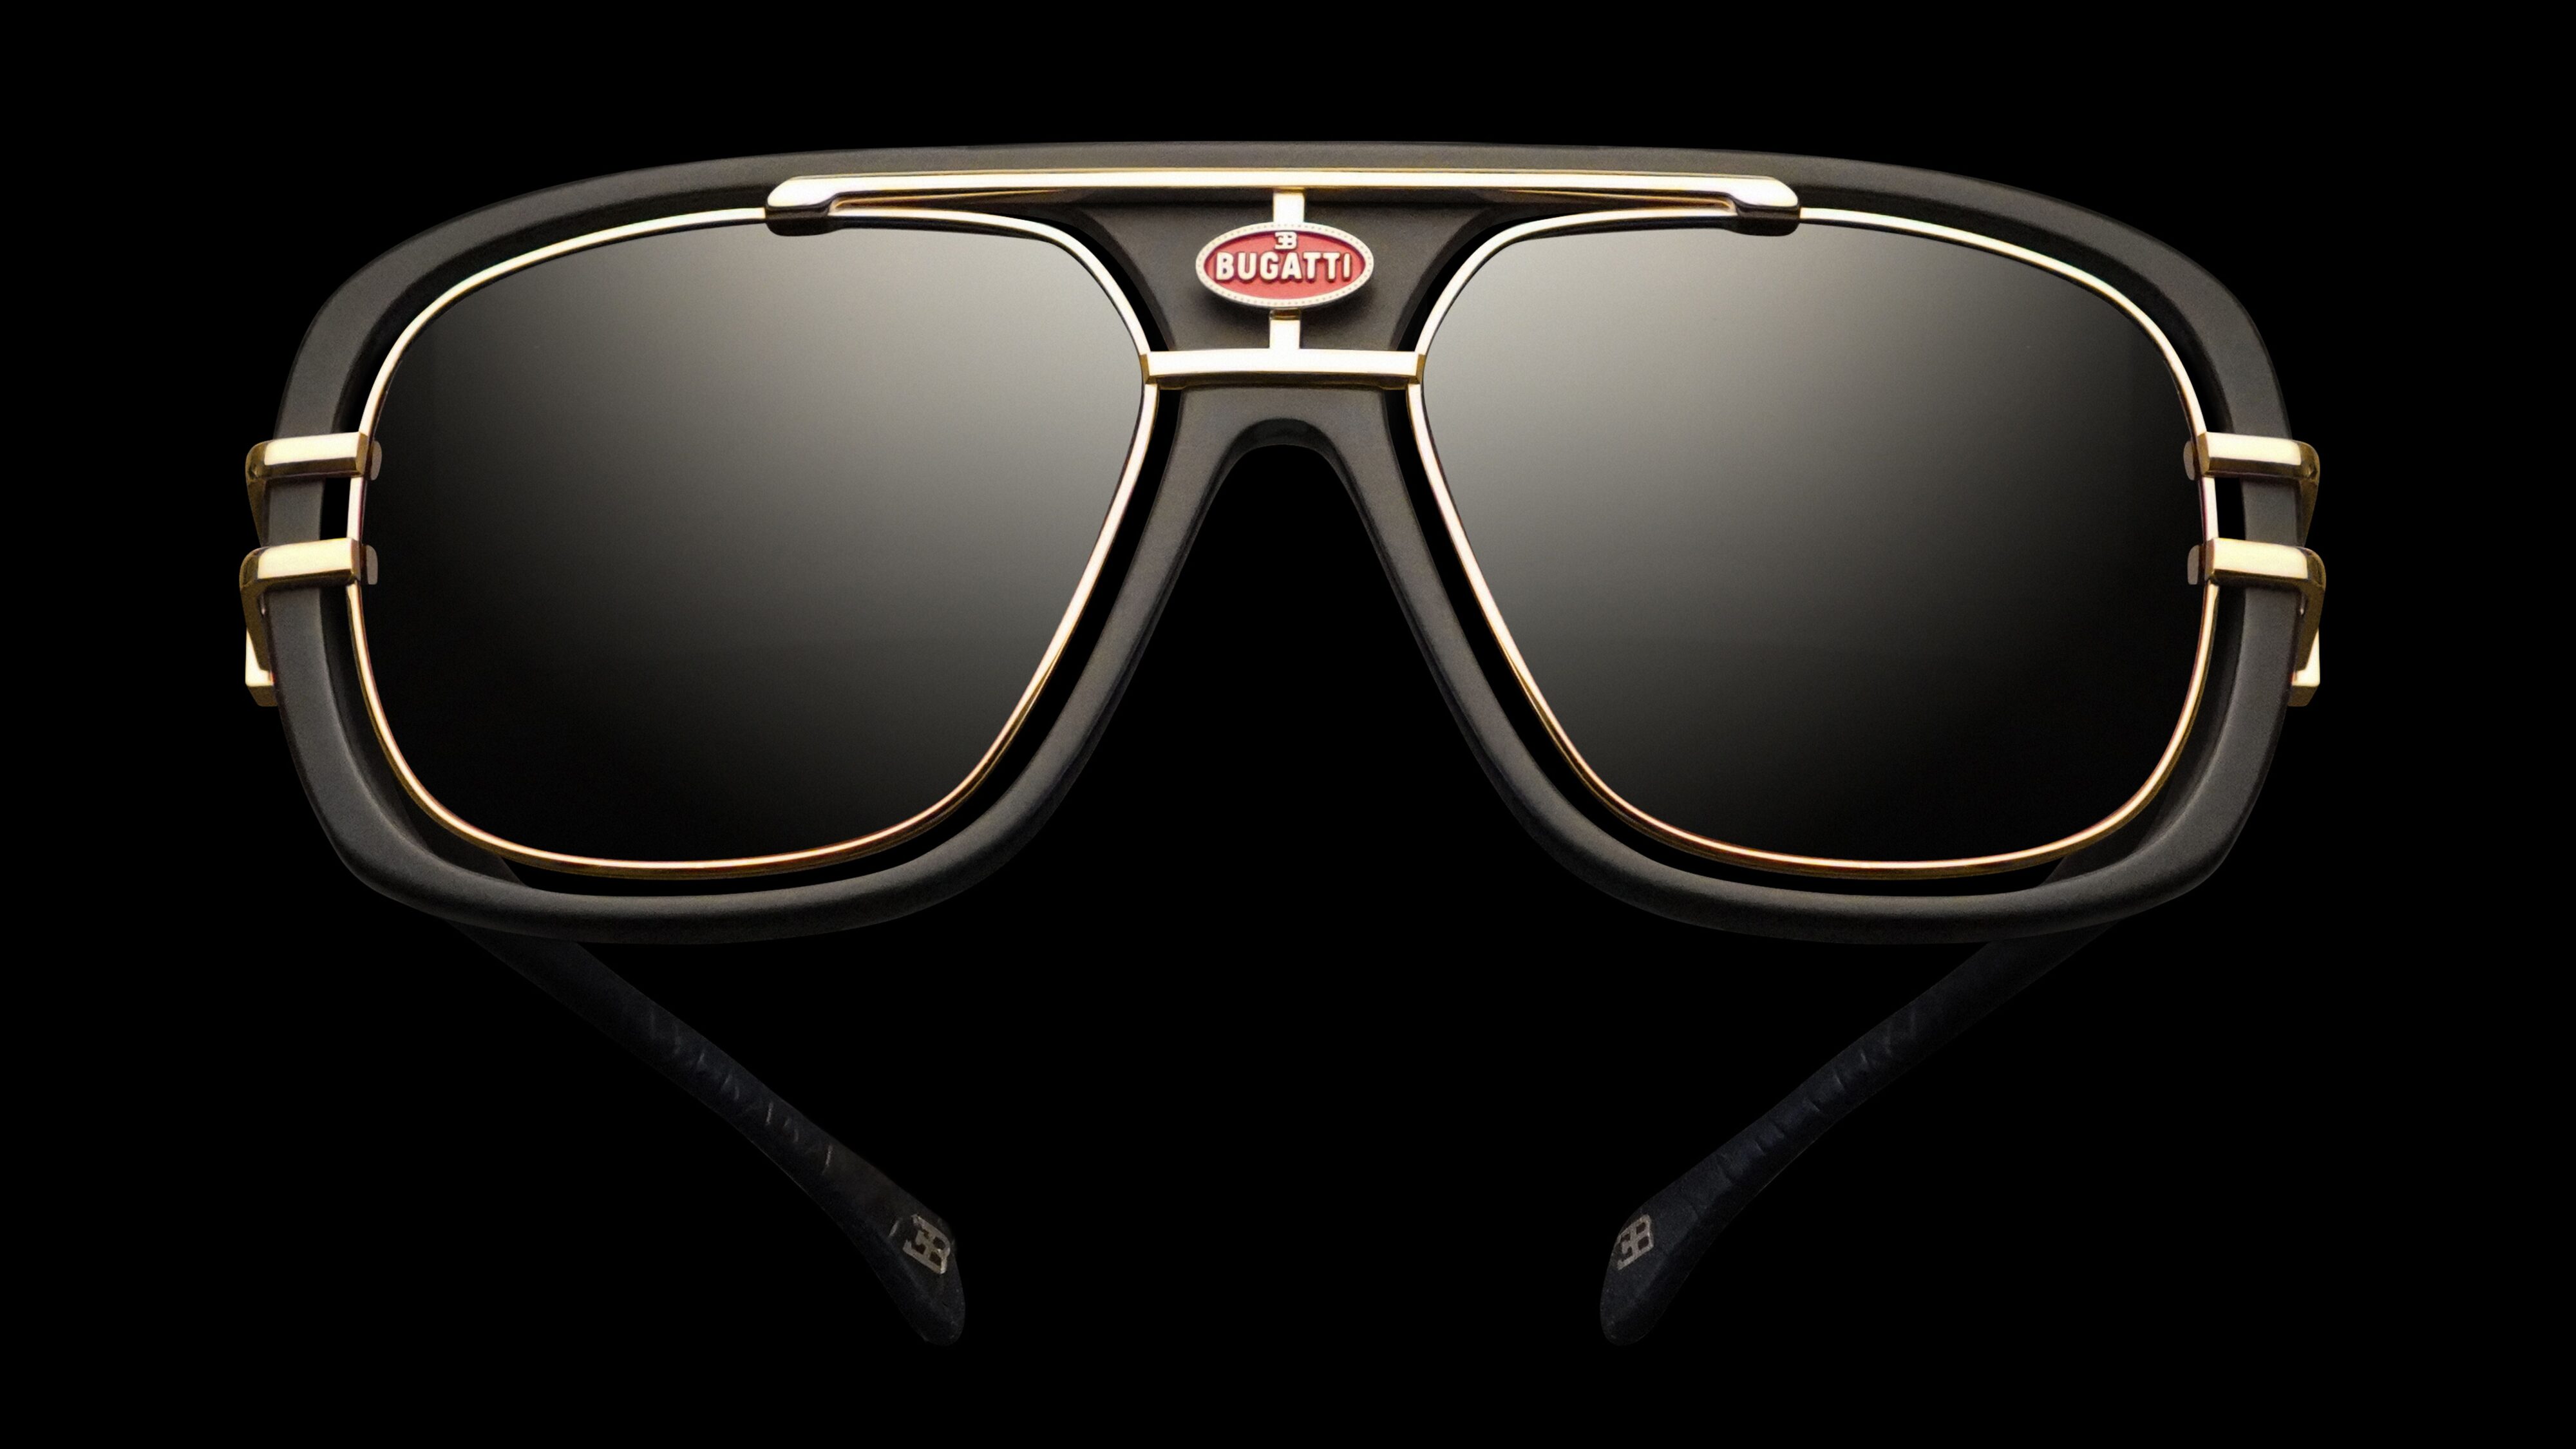 Bugatti Eyewear collection piece 07 is the most exclusive in the collection